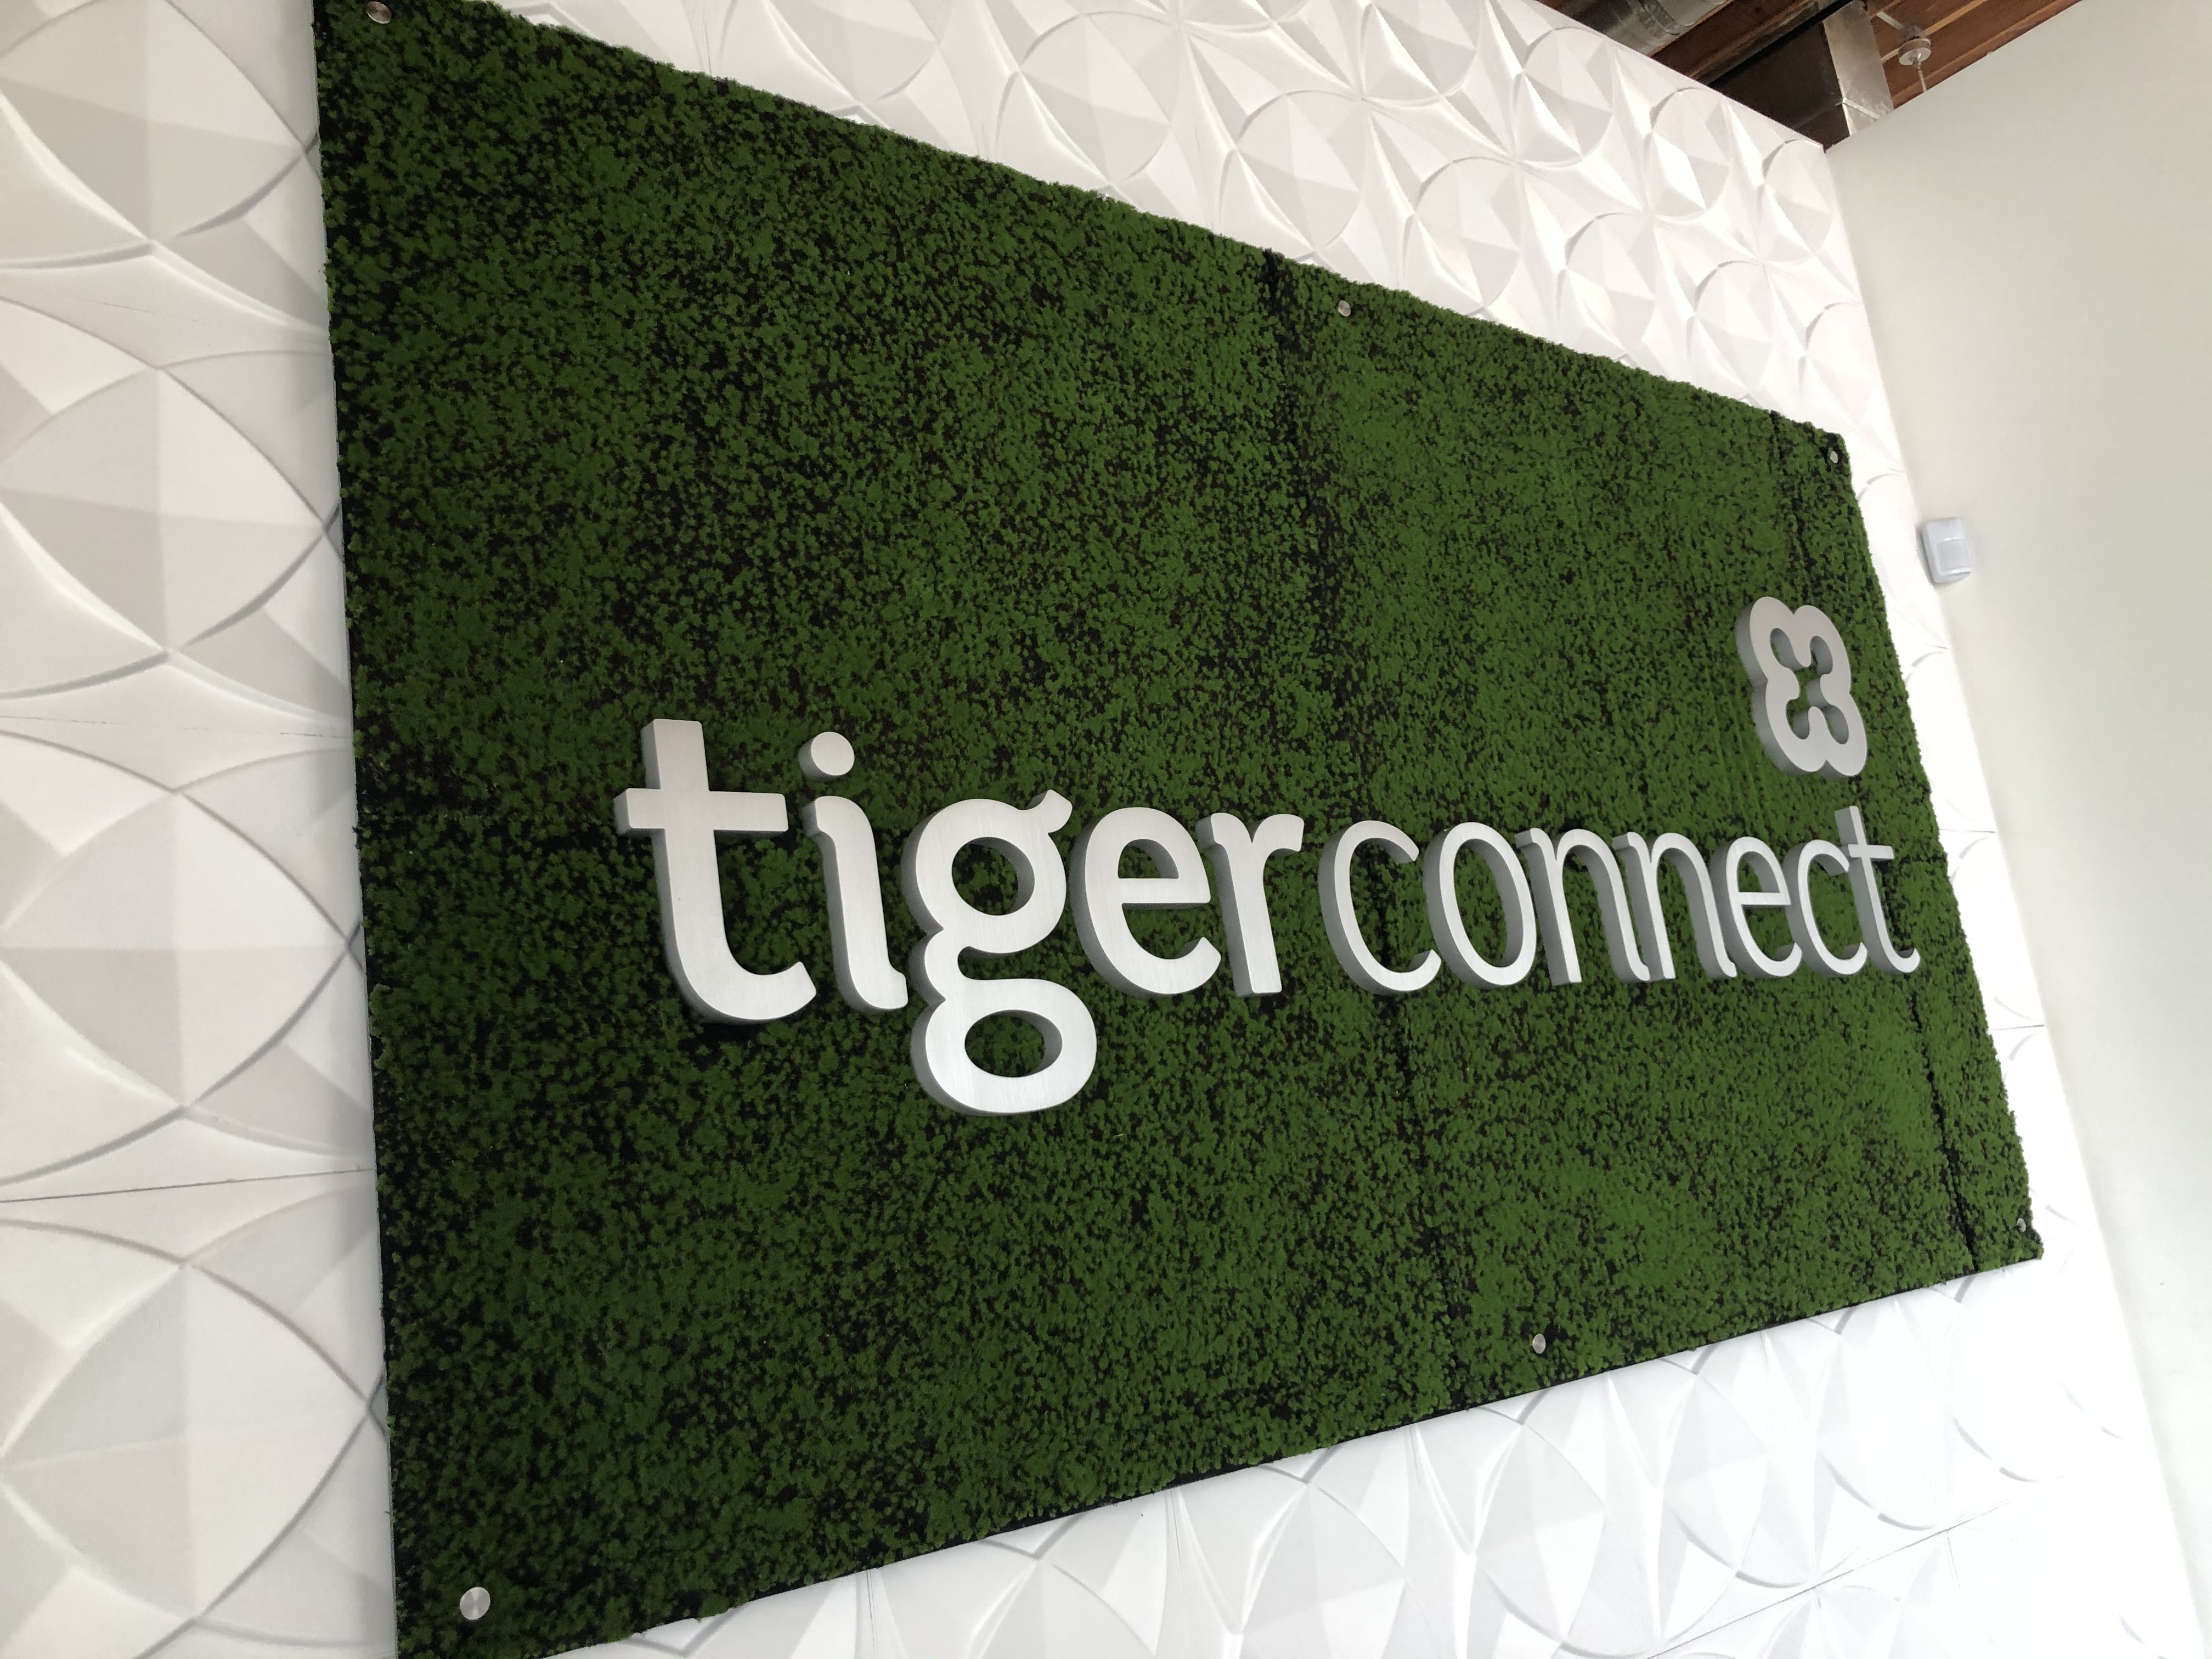 You are currently viewing Background Wallpaper for Tiger Connect in Santa Monica